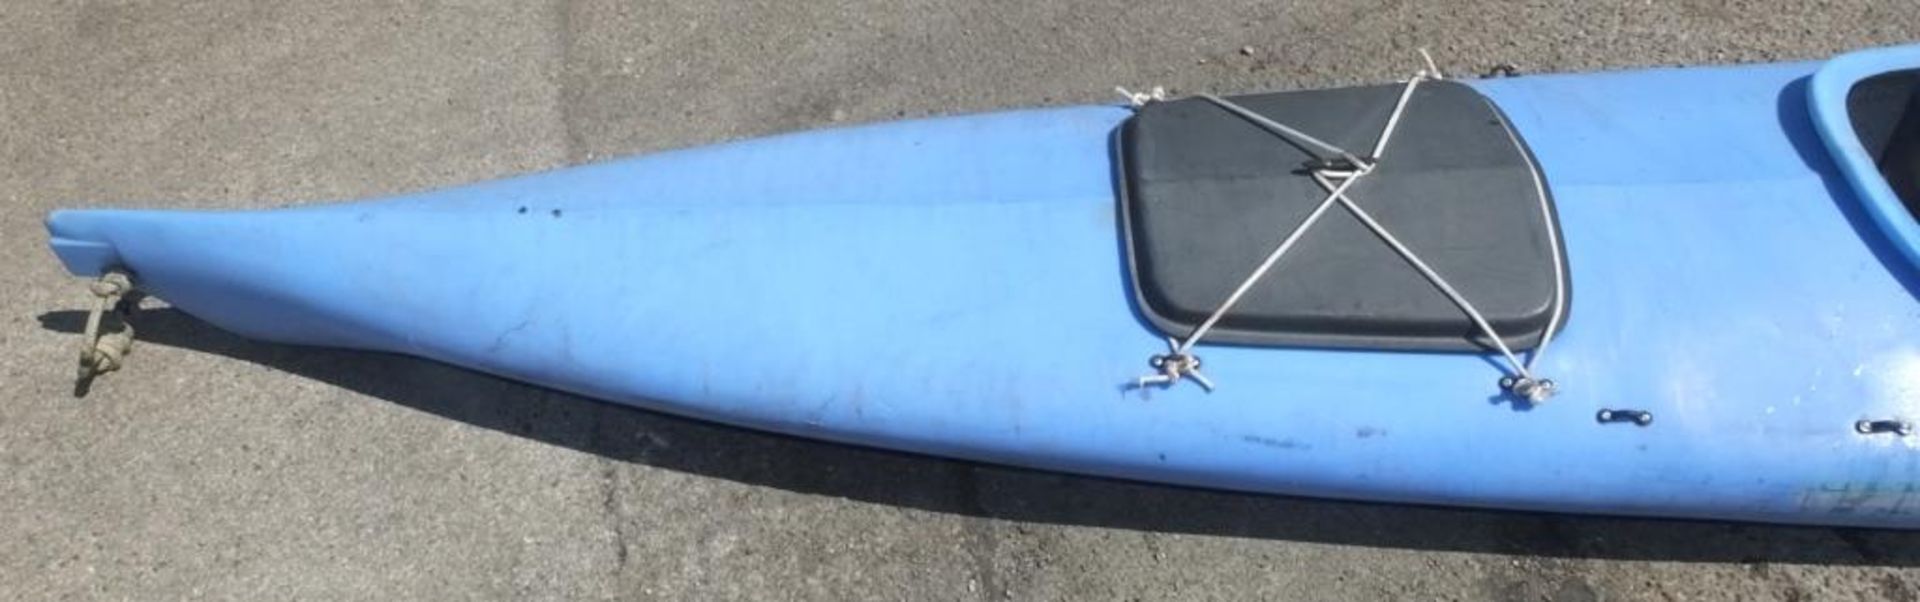 Hydra Sea-Runner Plastic Kayak - paddle NOT included - LOCATED AT OUR CROFT SITE - Image 5 of 5